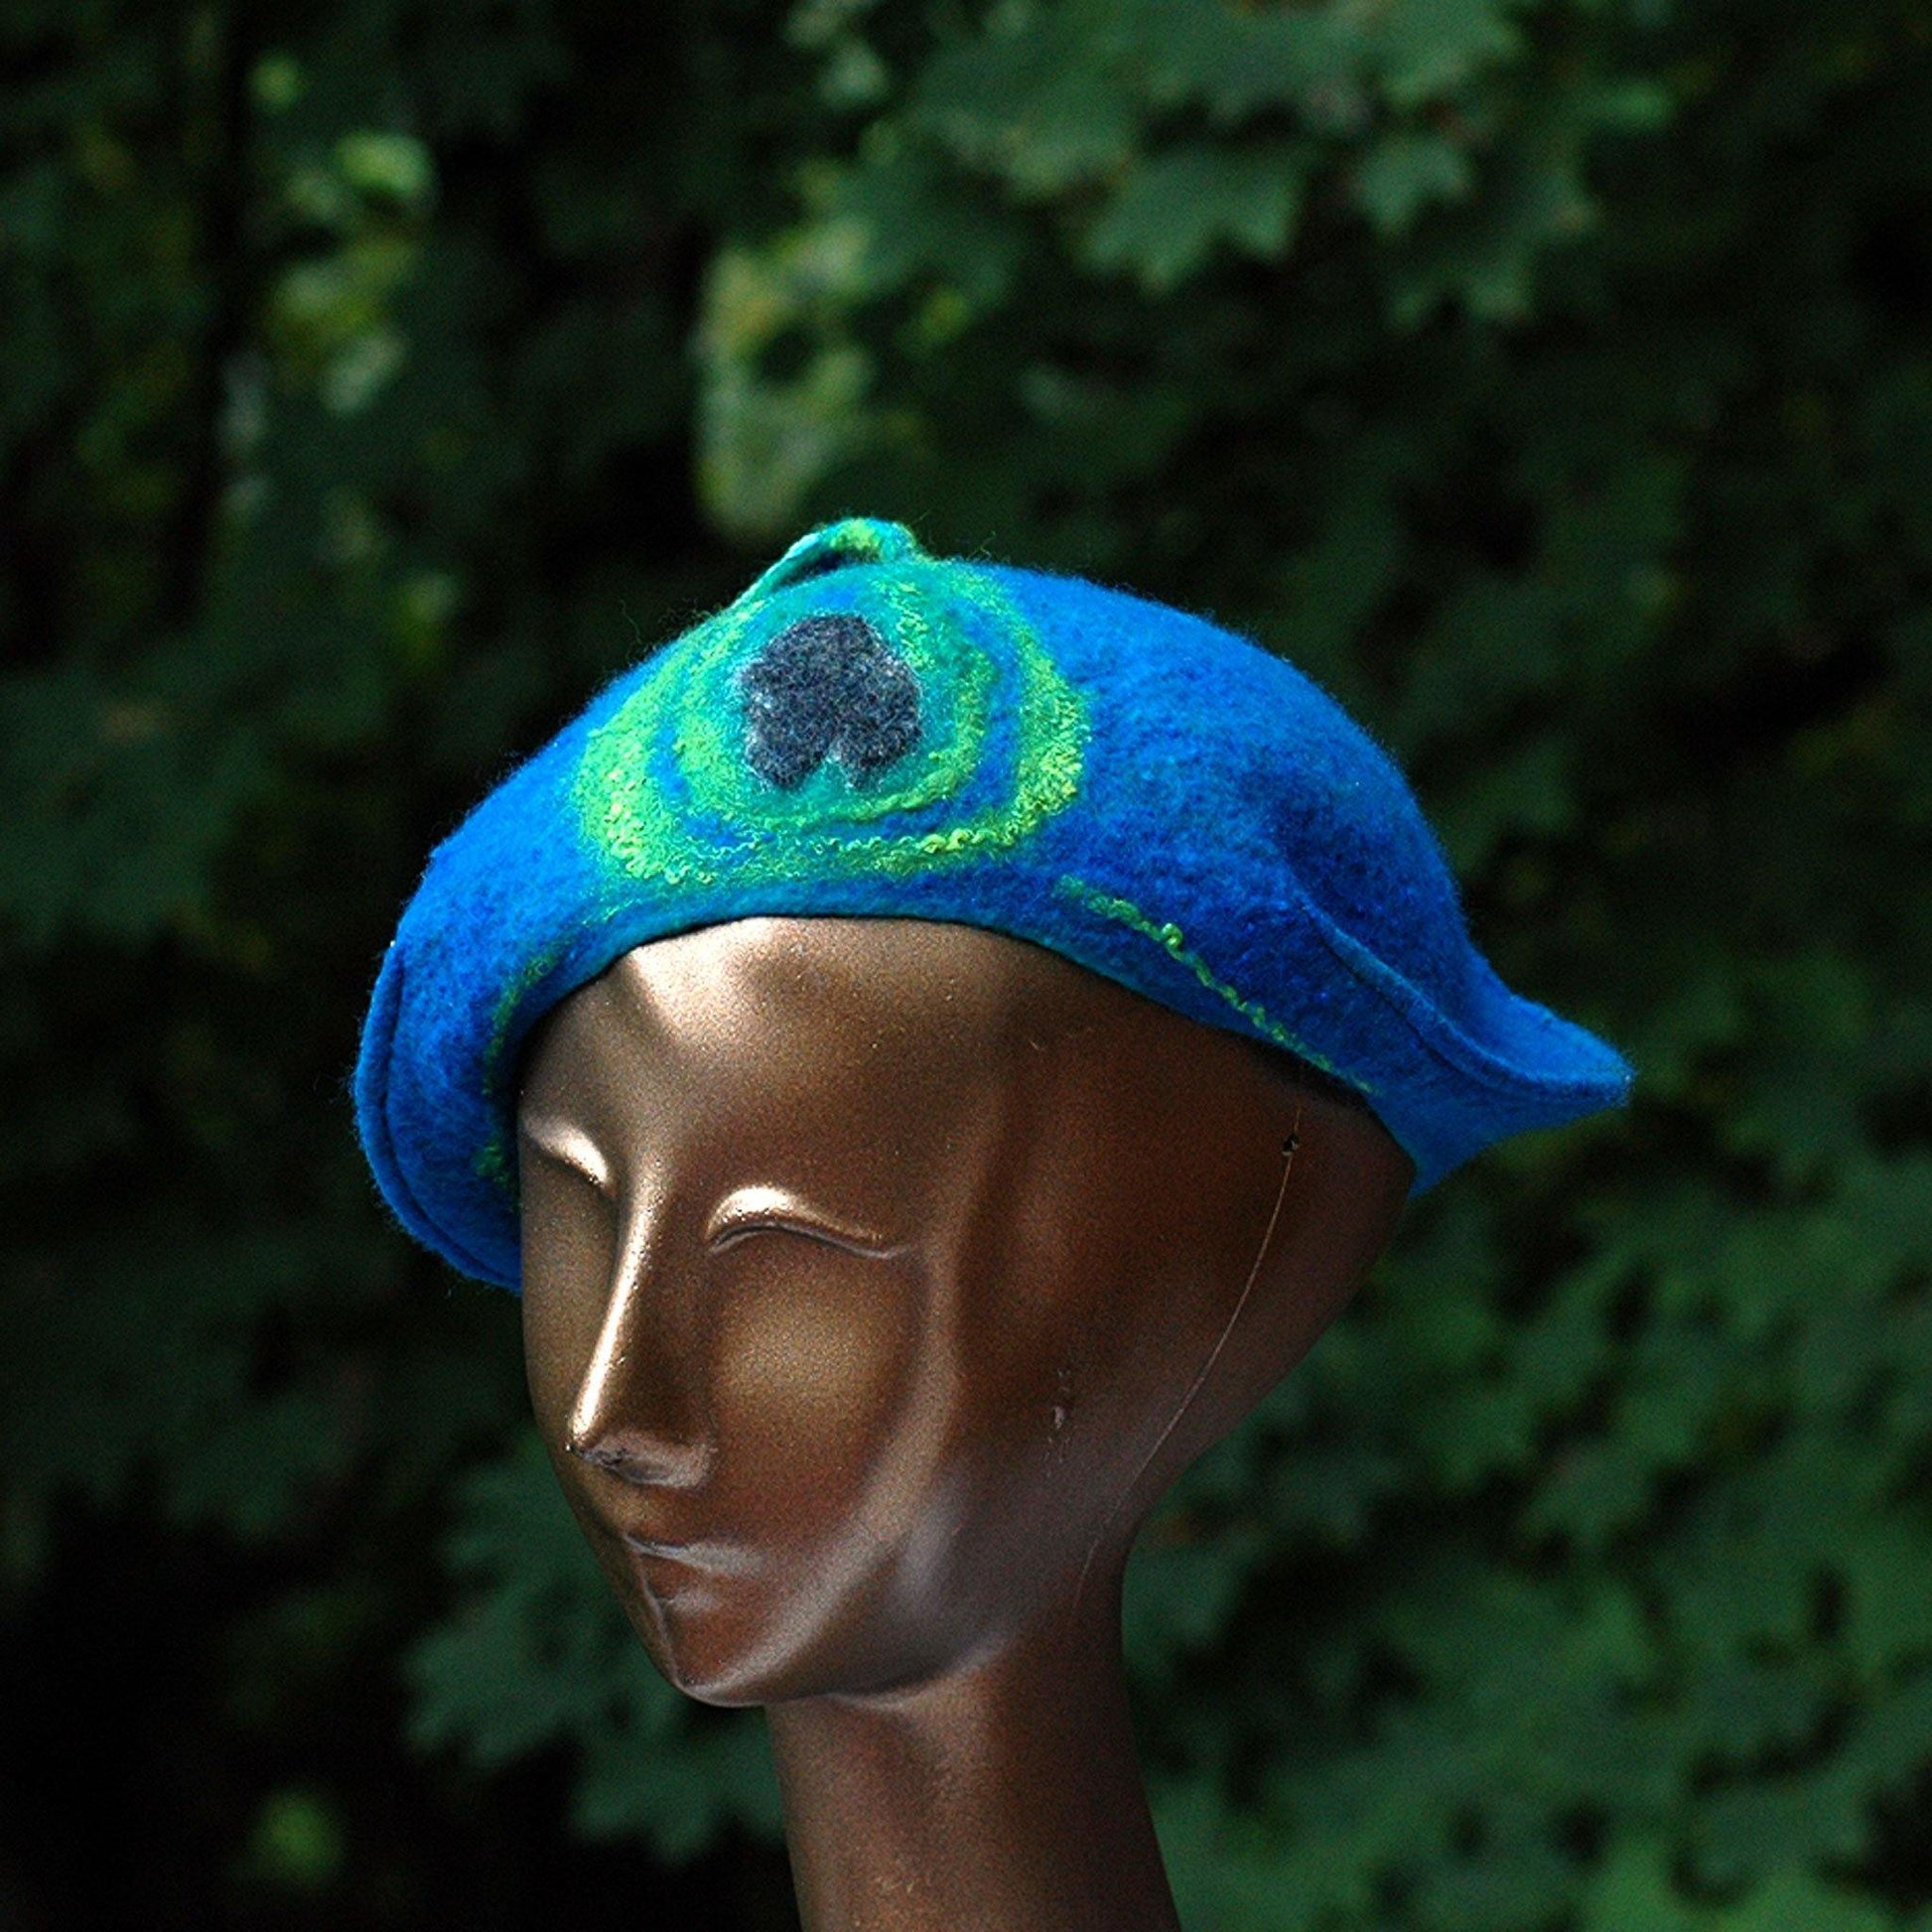 Teal Felted Cap with Stylized Peacock Feathers - three quarters view